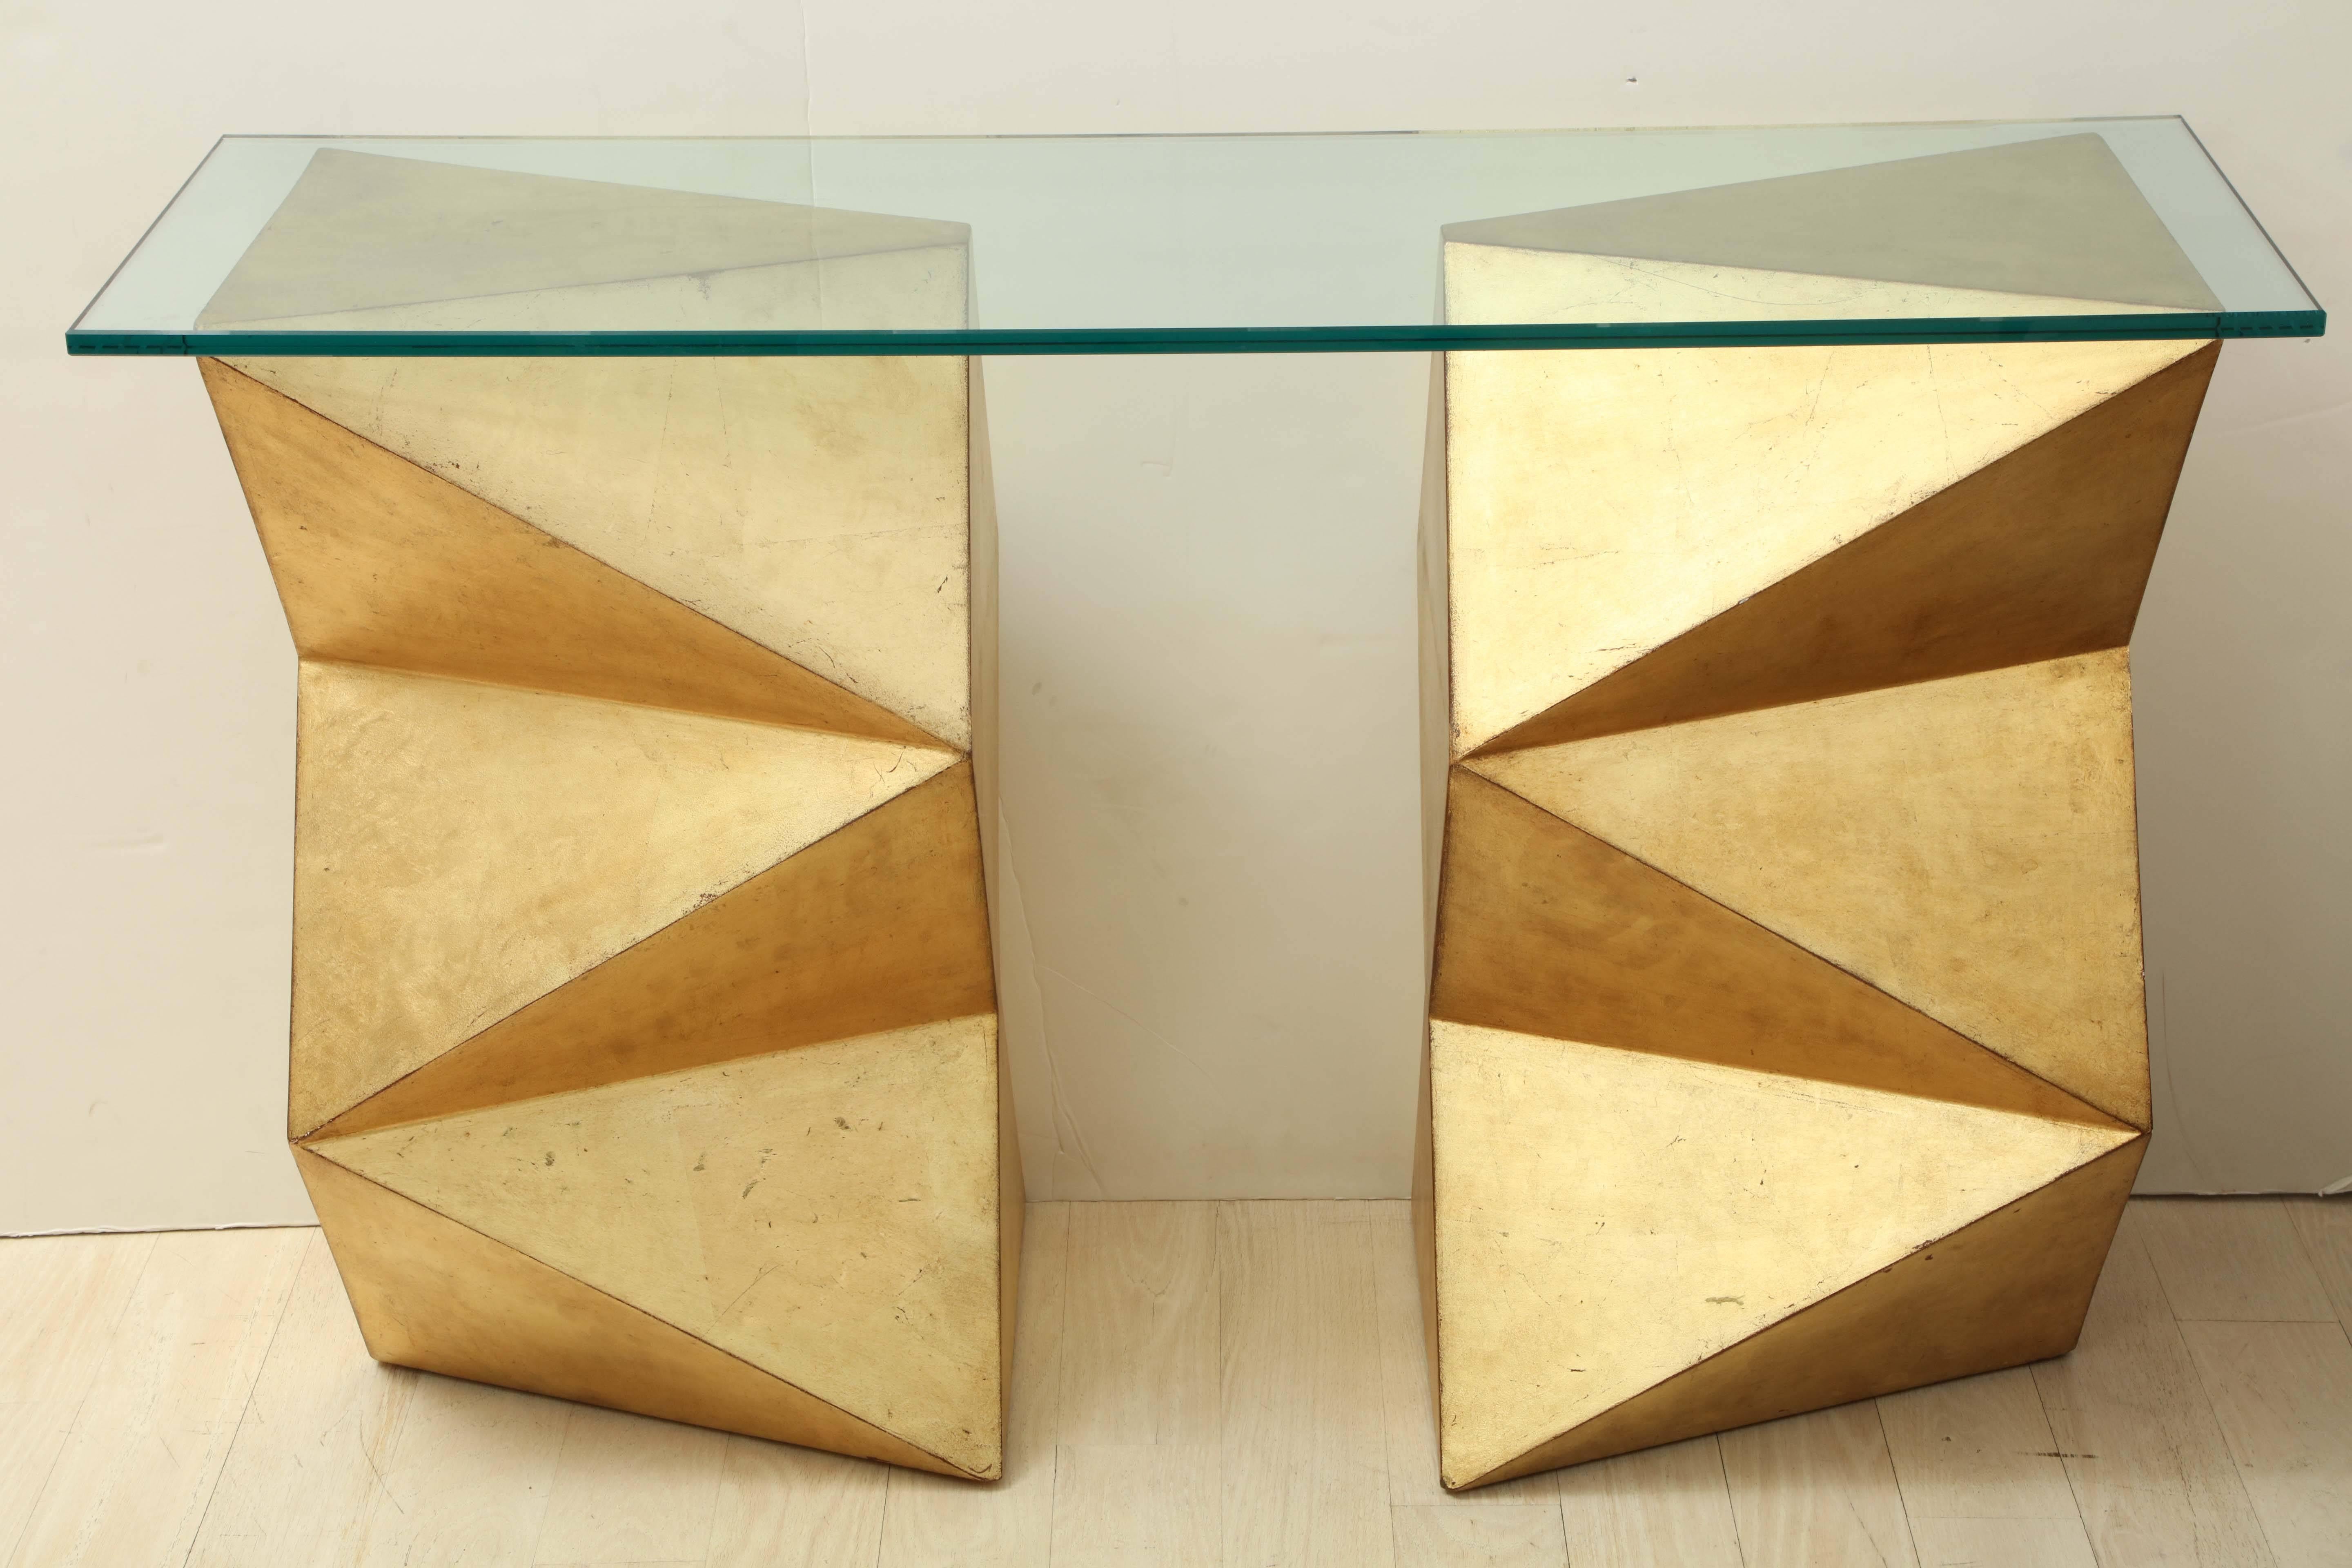 1970s French giltwood and glass console table, the rectangular glass top sitting on two geometric form supports.

Dimensions:
Each support: 16